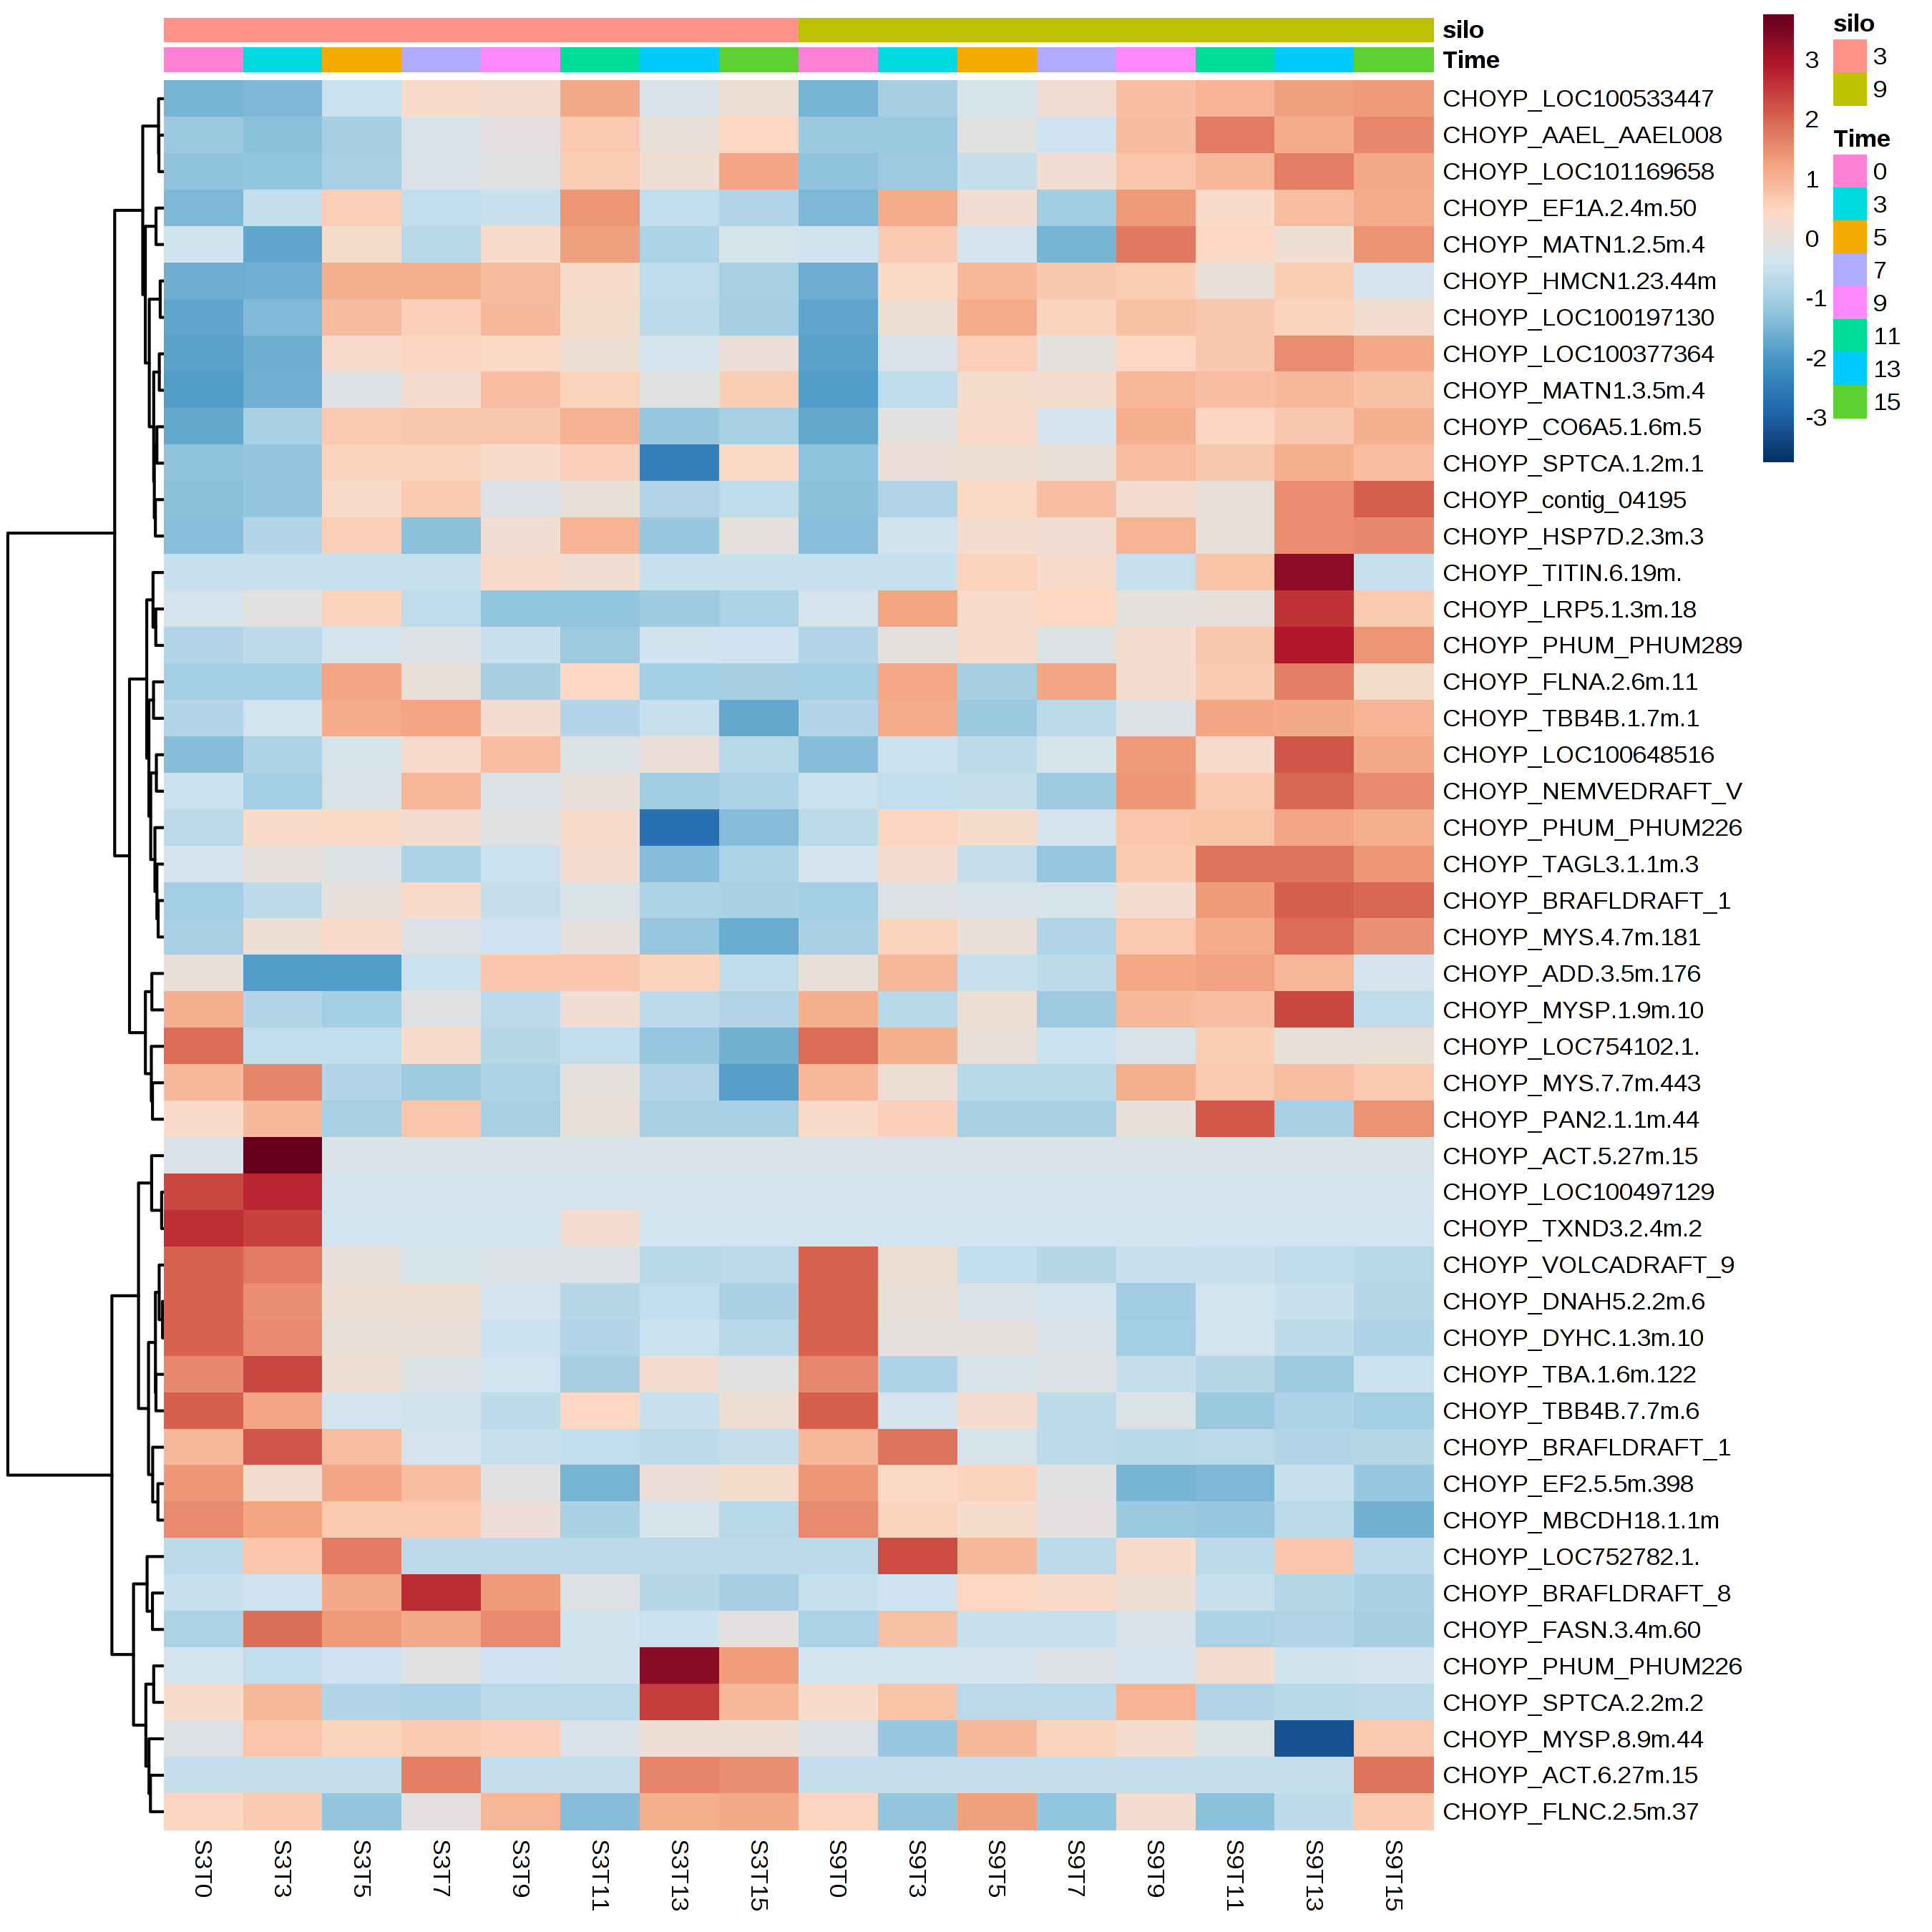 heatmap of protein abundance over time in the two temperatures (euclidean distance and ward clustering)